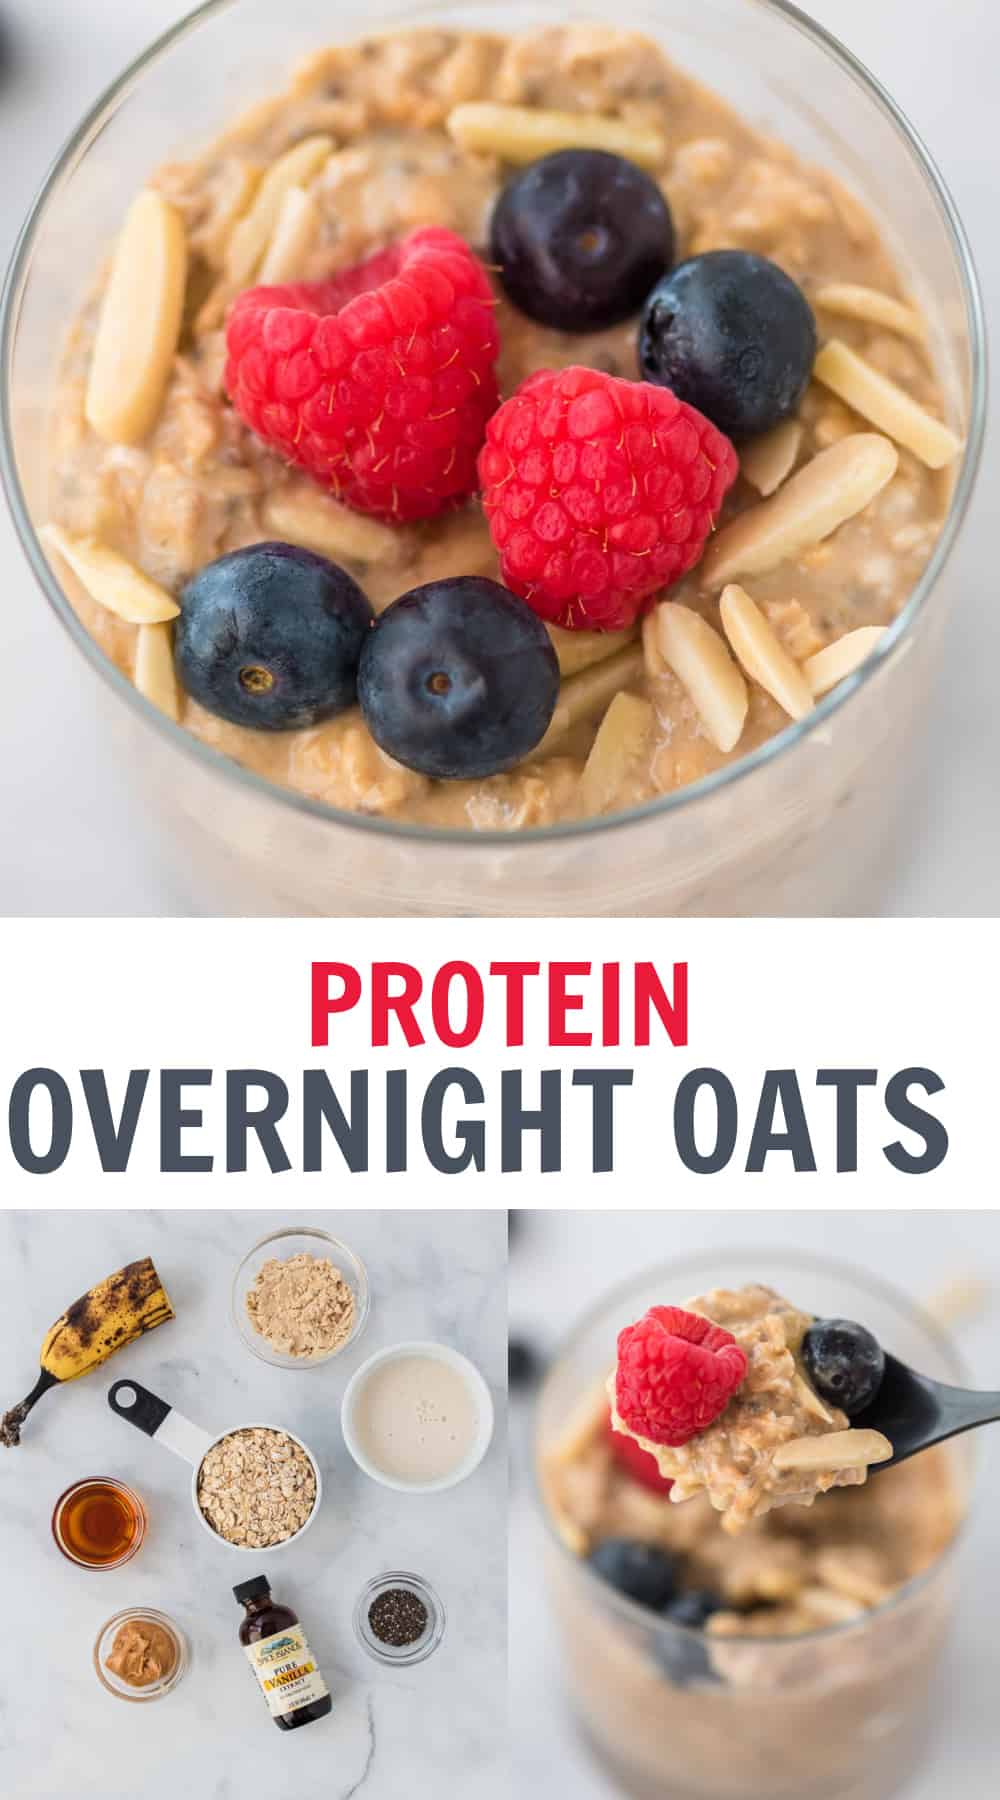 image with text "protein overnight oats"